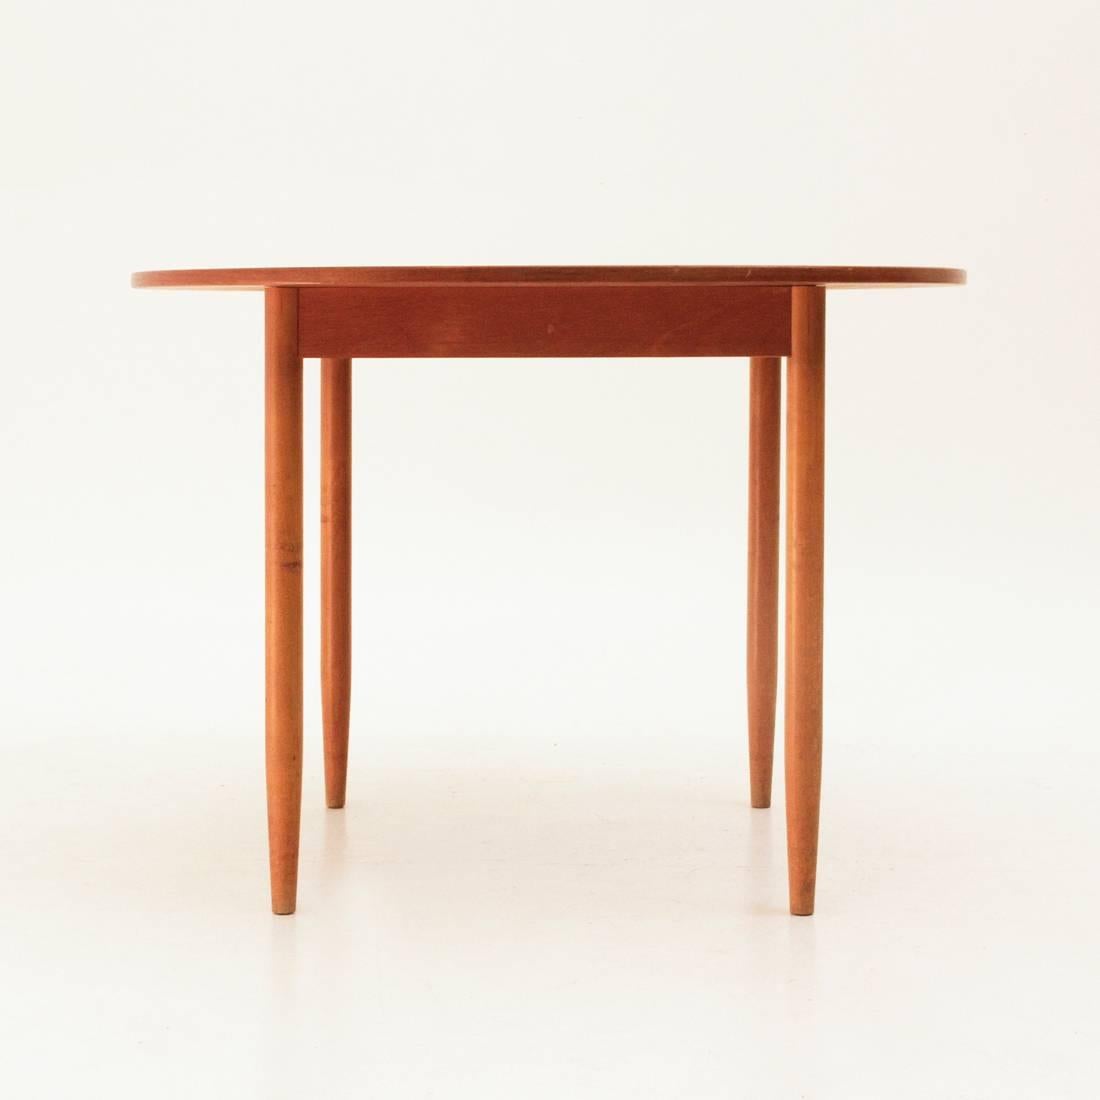 Round dining table from the 1960s produced by Ulferts in Sweden.
Wodden teak frame.